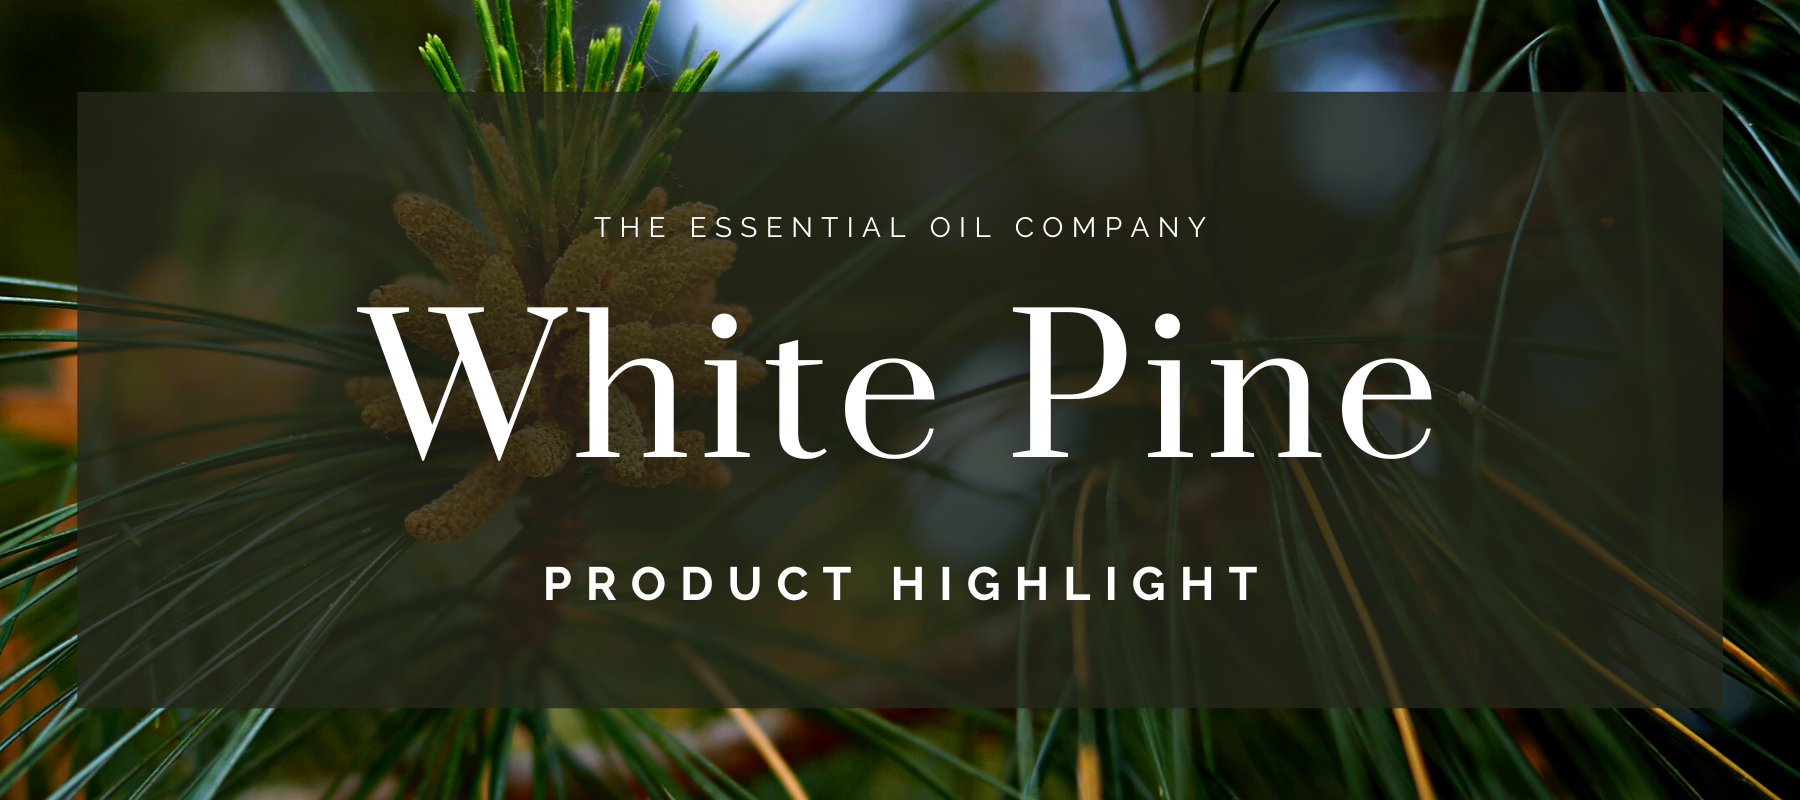 White Pine: Product Highlight